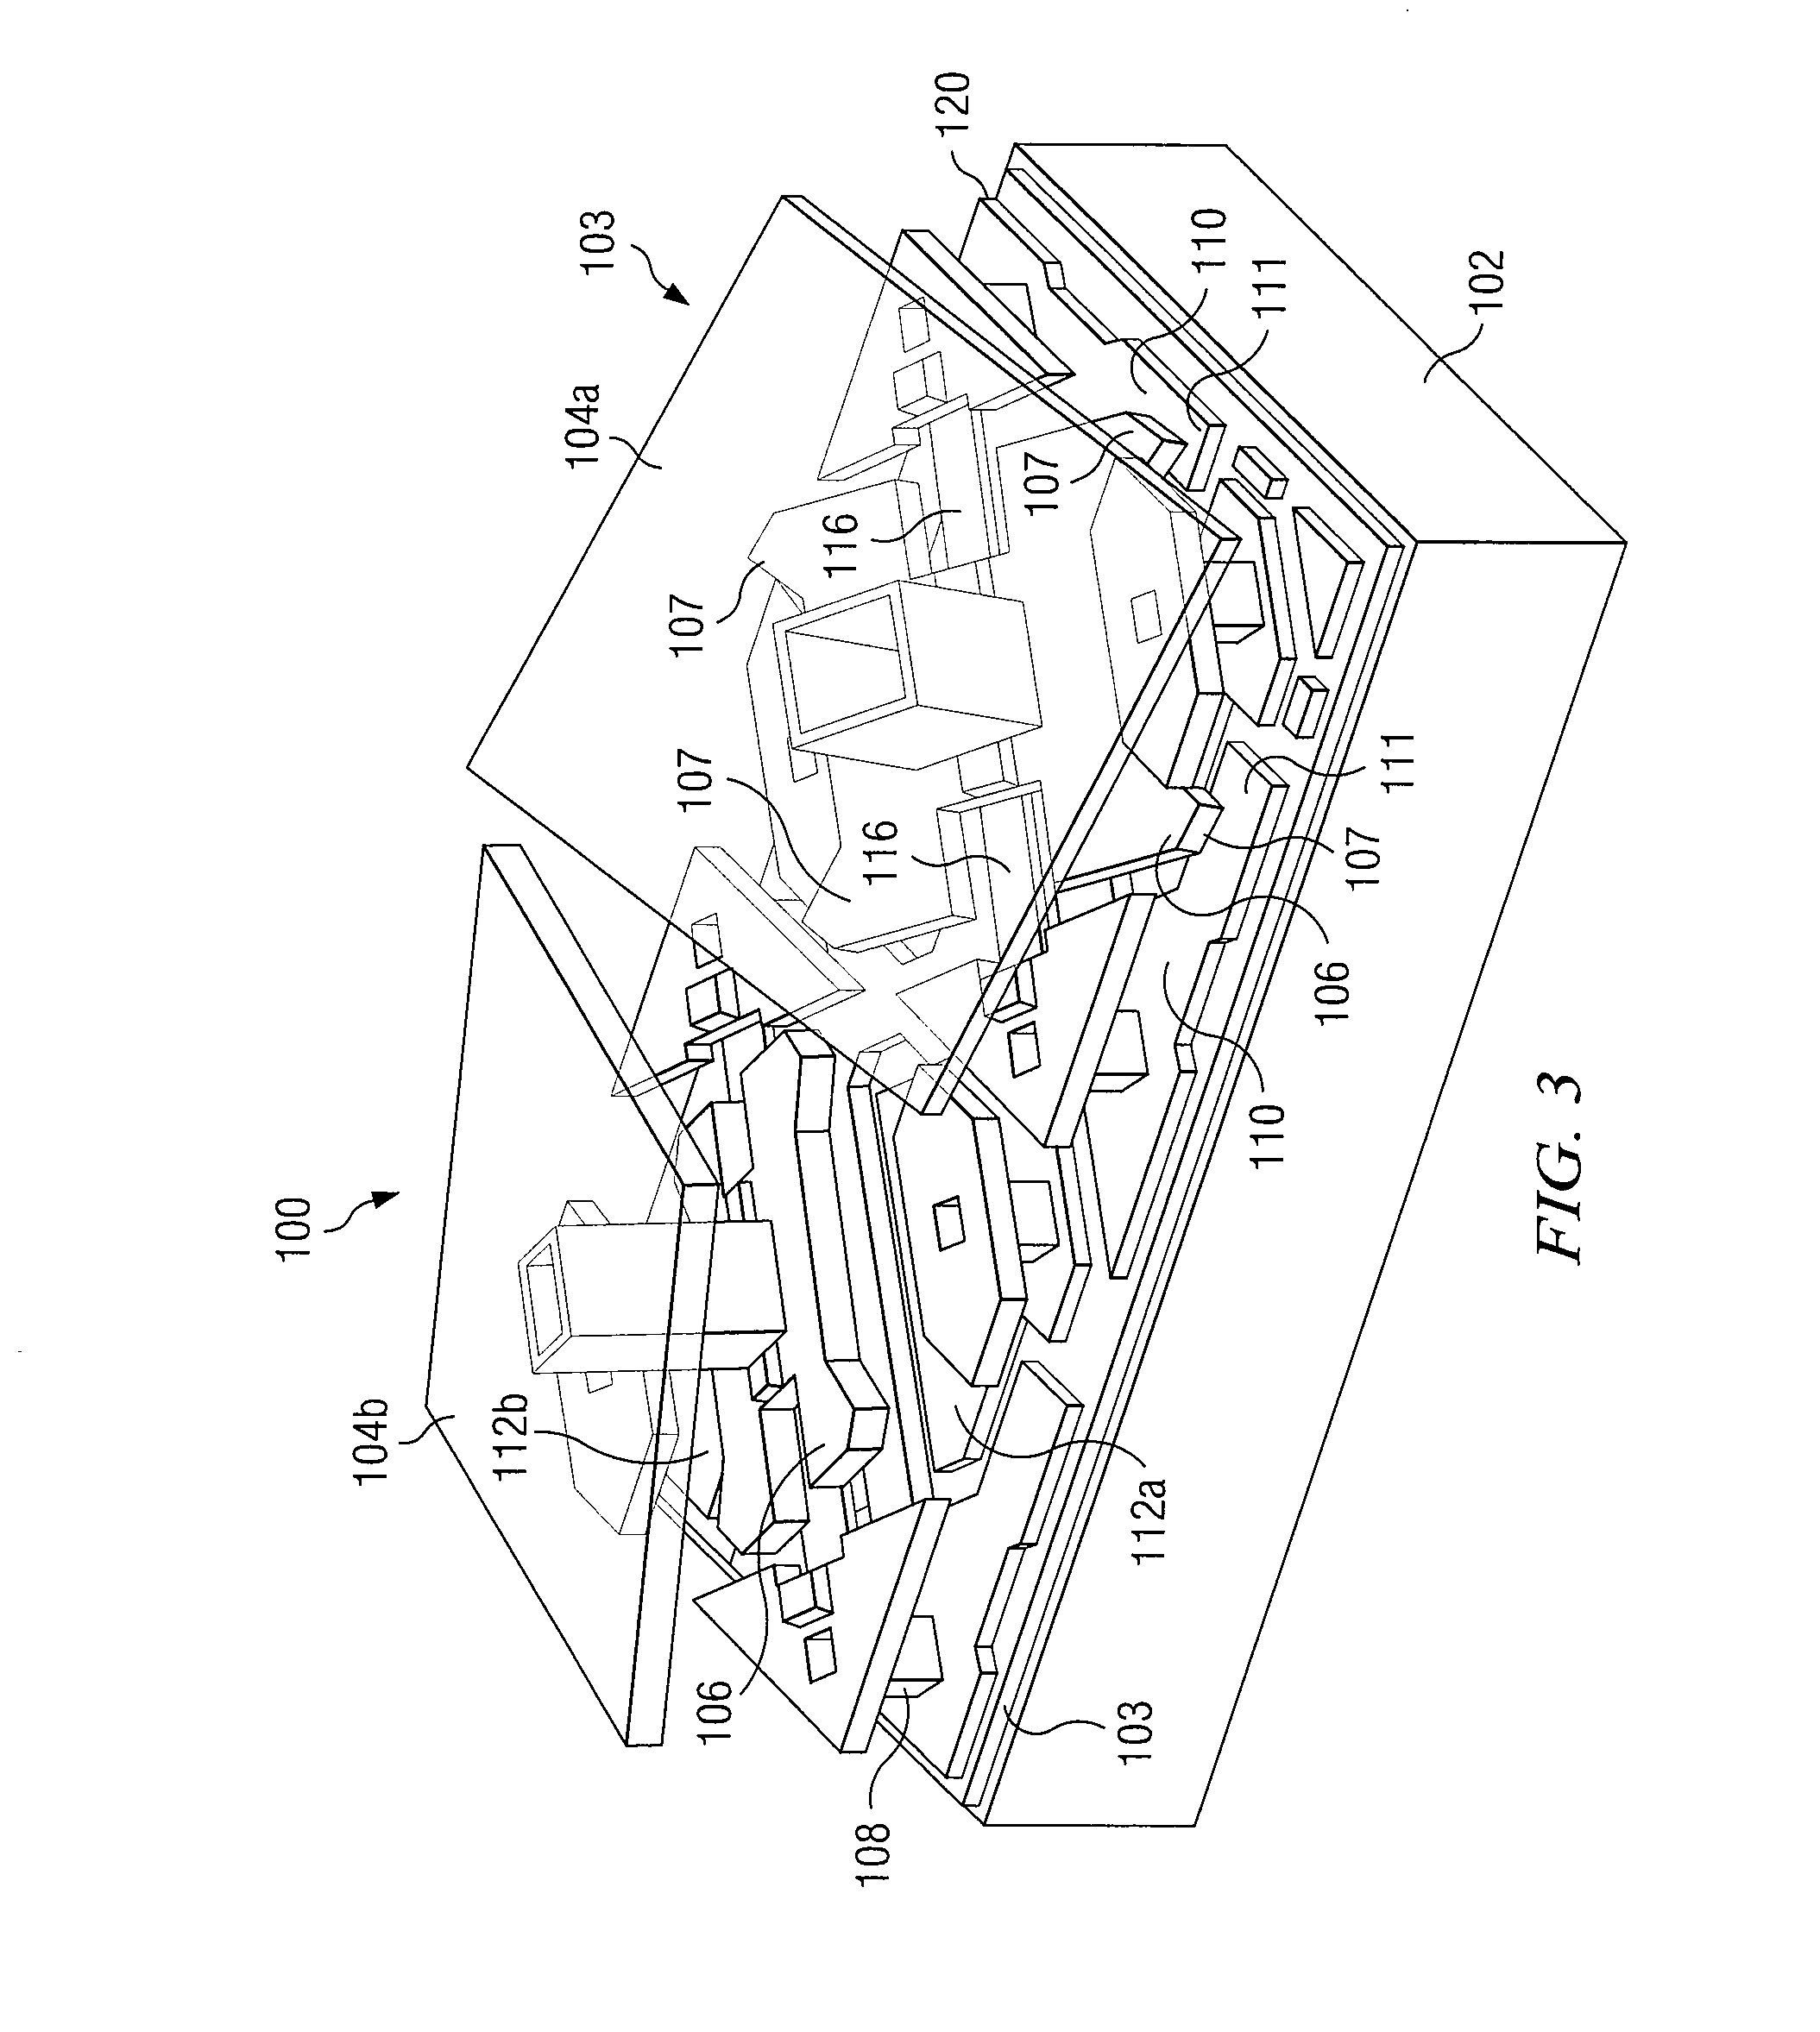 System And Method For Controlling A Digital Micromirror Device (DMD) System To Generate An Image